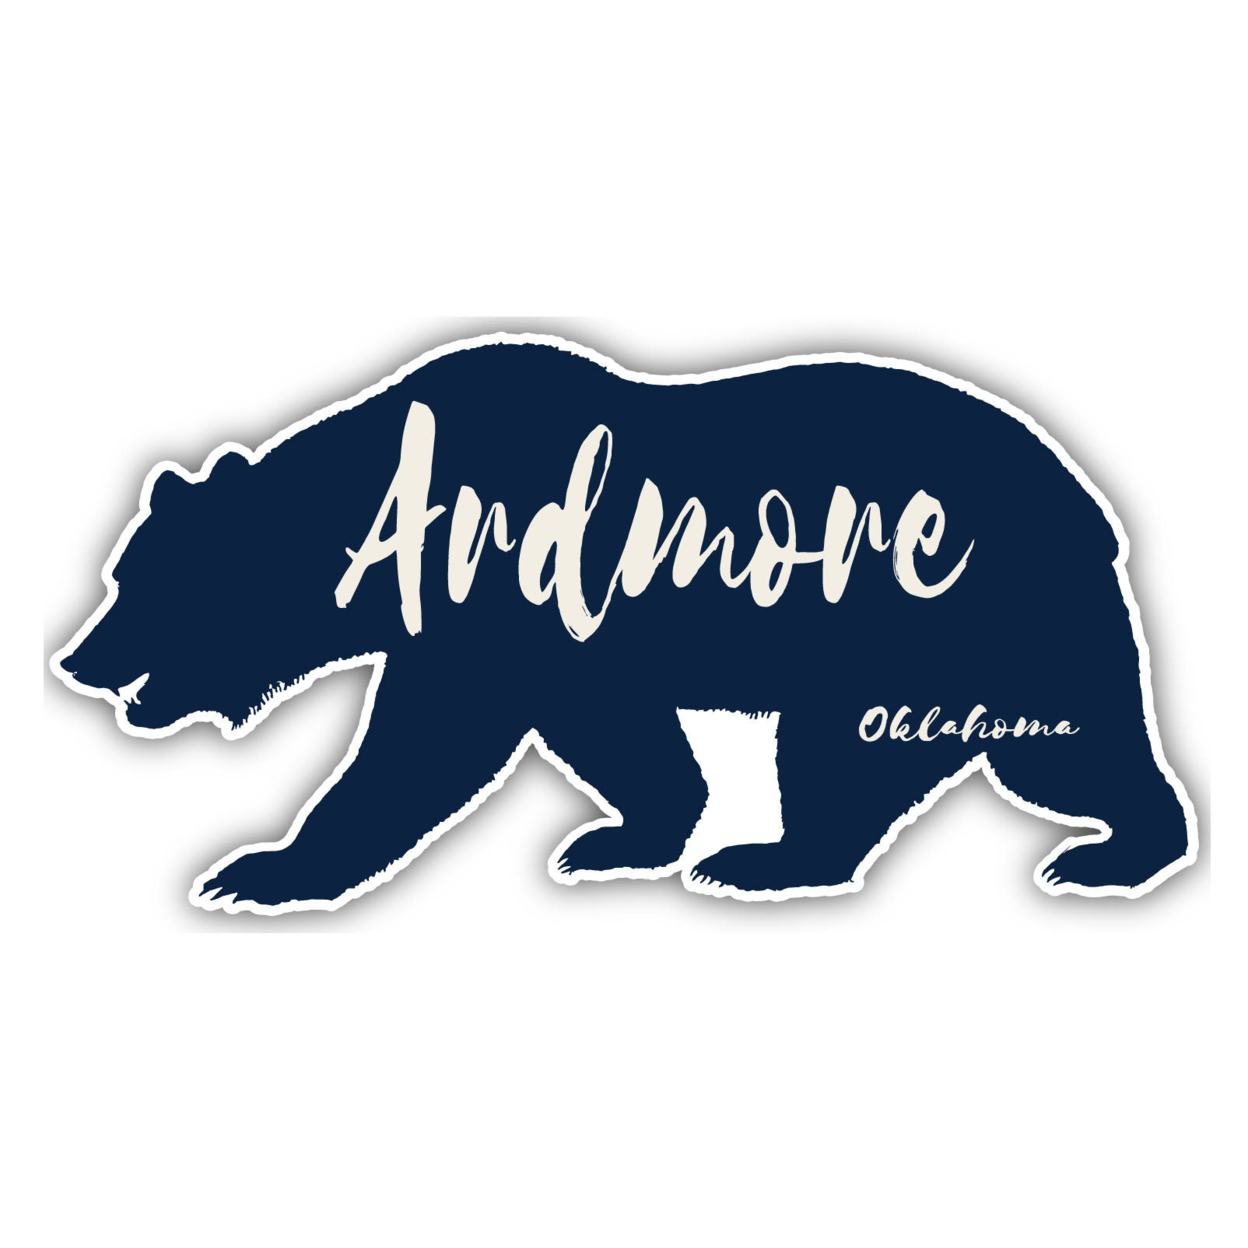 Ardmore Oklahoma Souvenir Decorative Stickers (Choose Theme And Size) - 4-Pack, 8-Inch, Bear